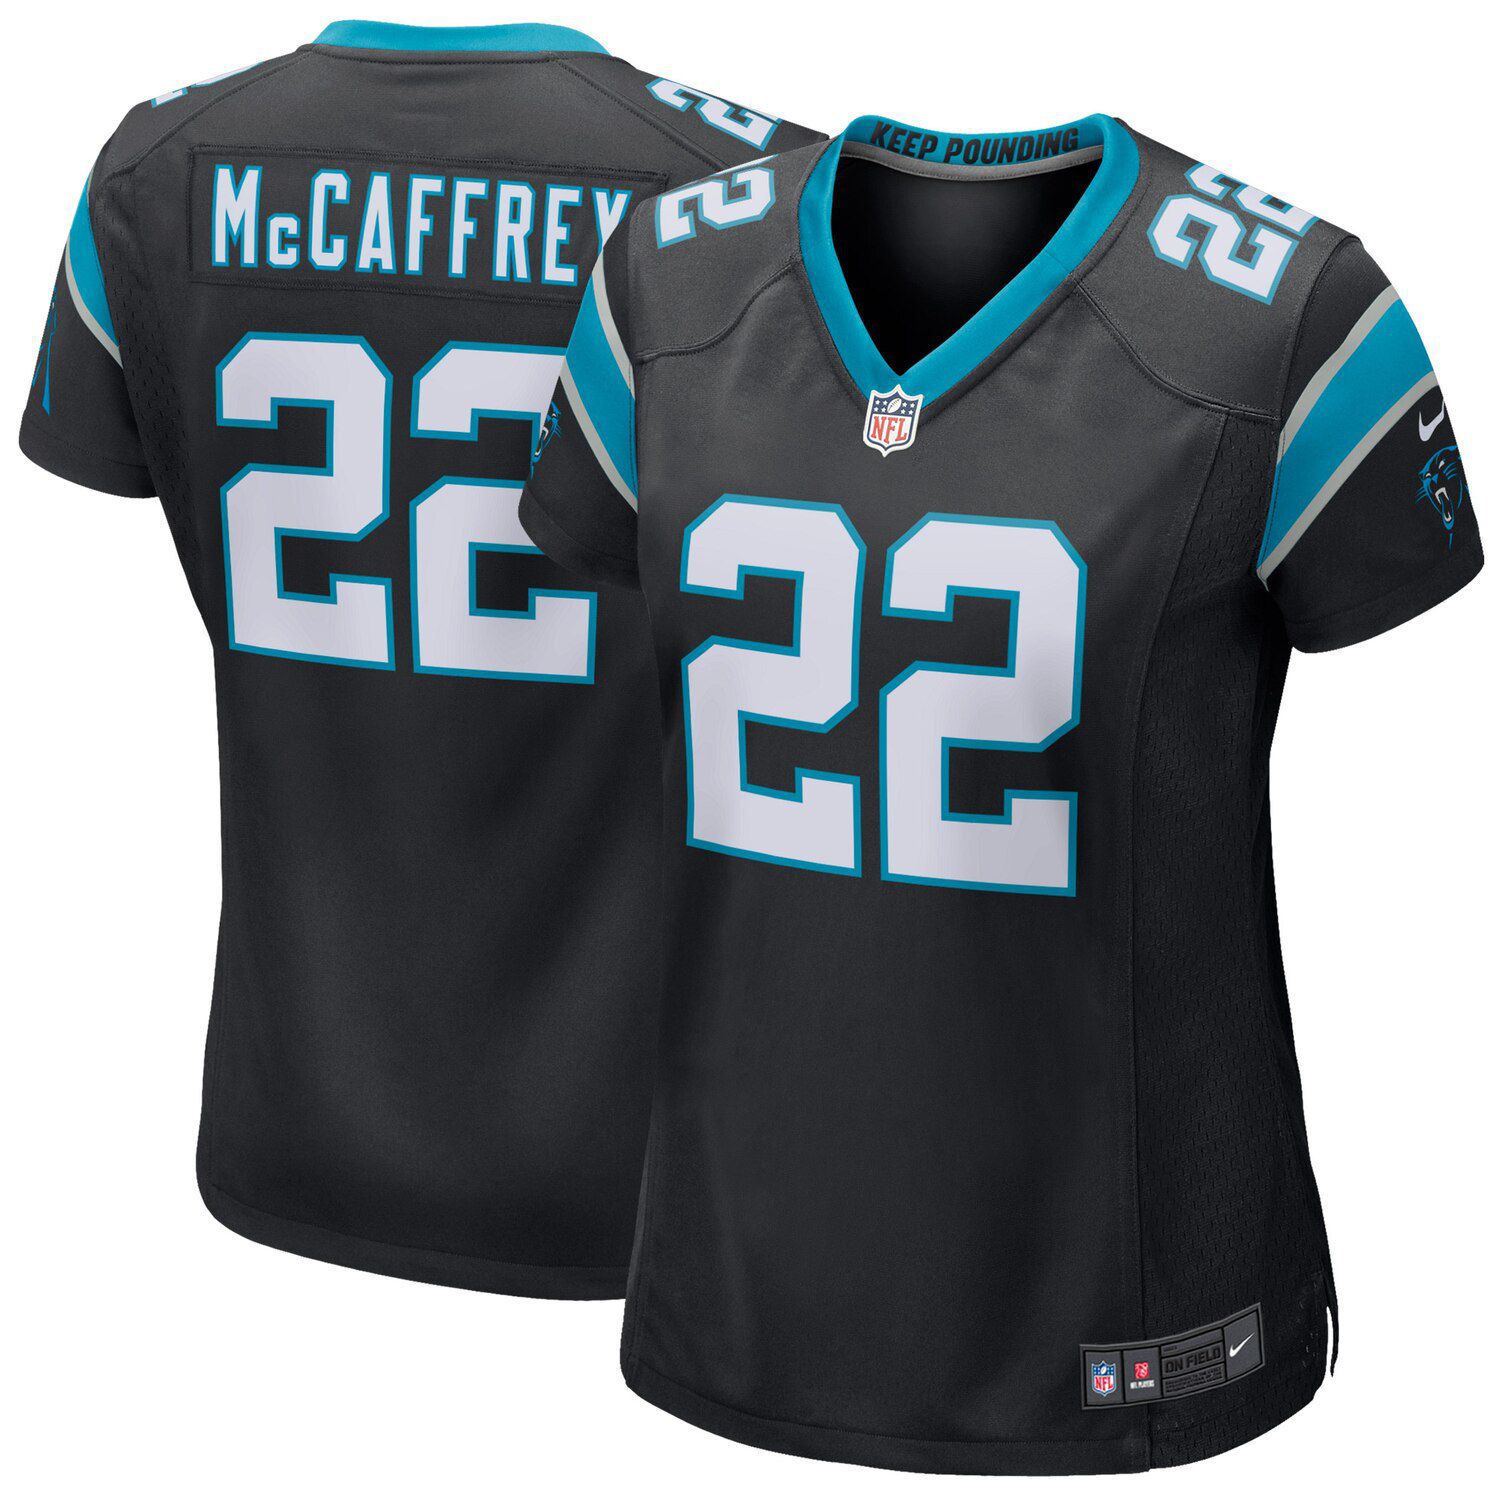 panthers jersey raleigh nc